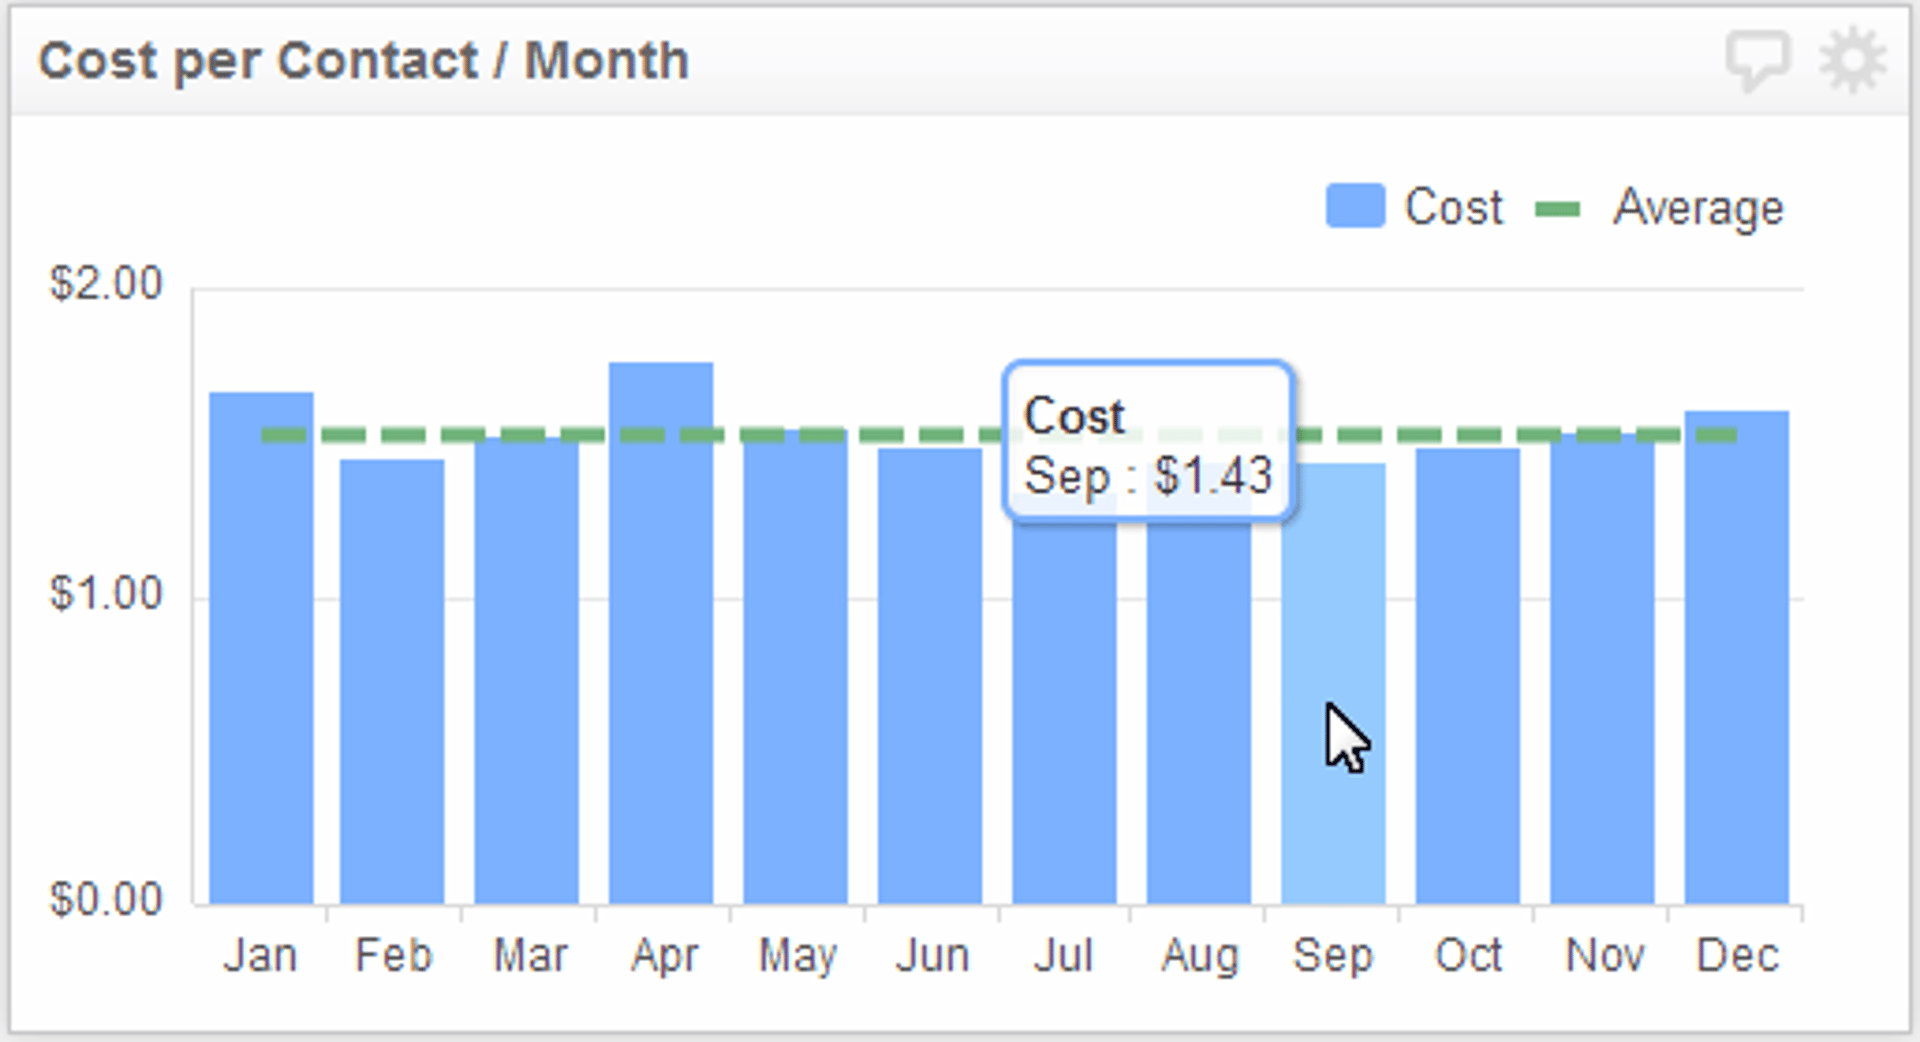 Related KPI Examples - Cost per Contact Metric